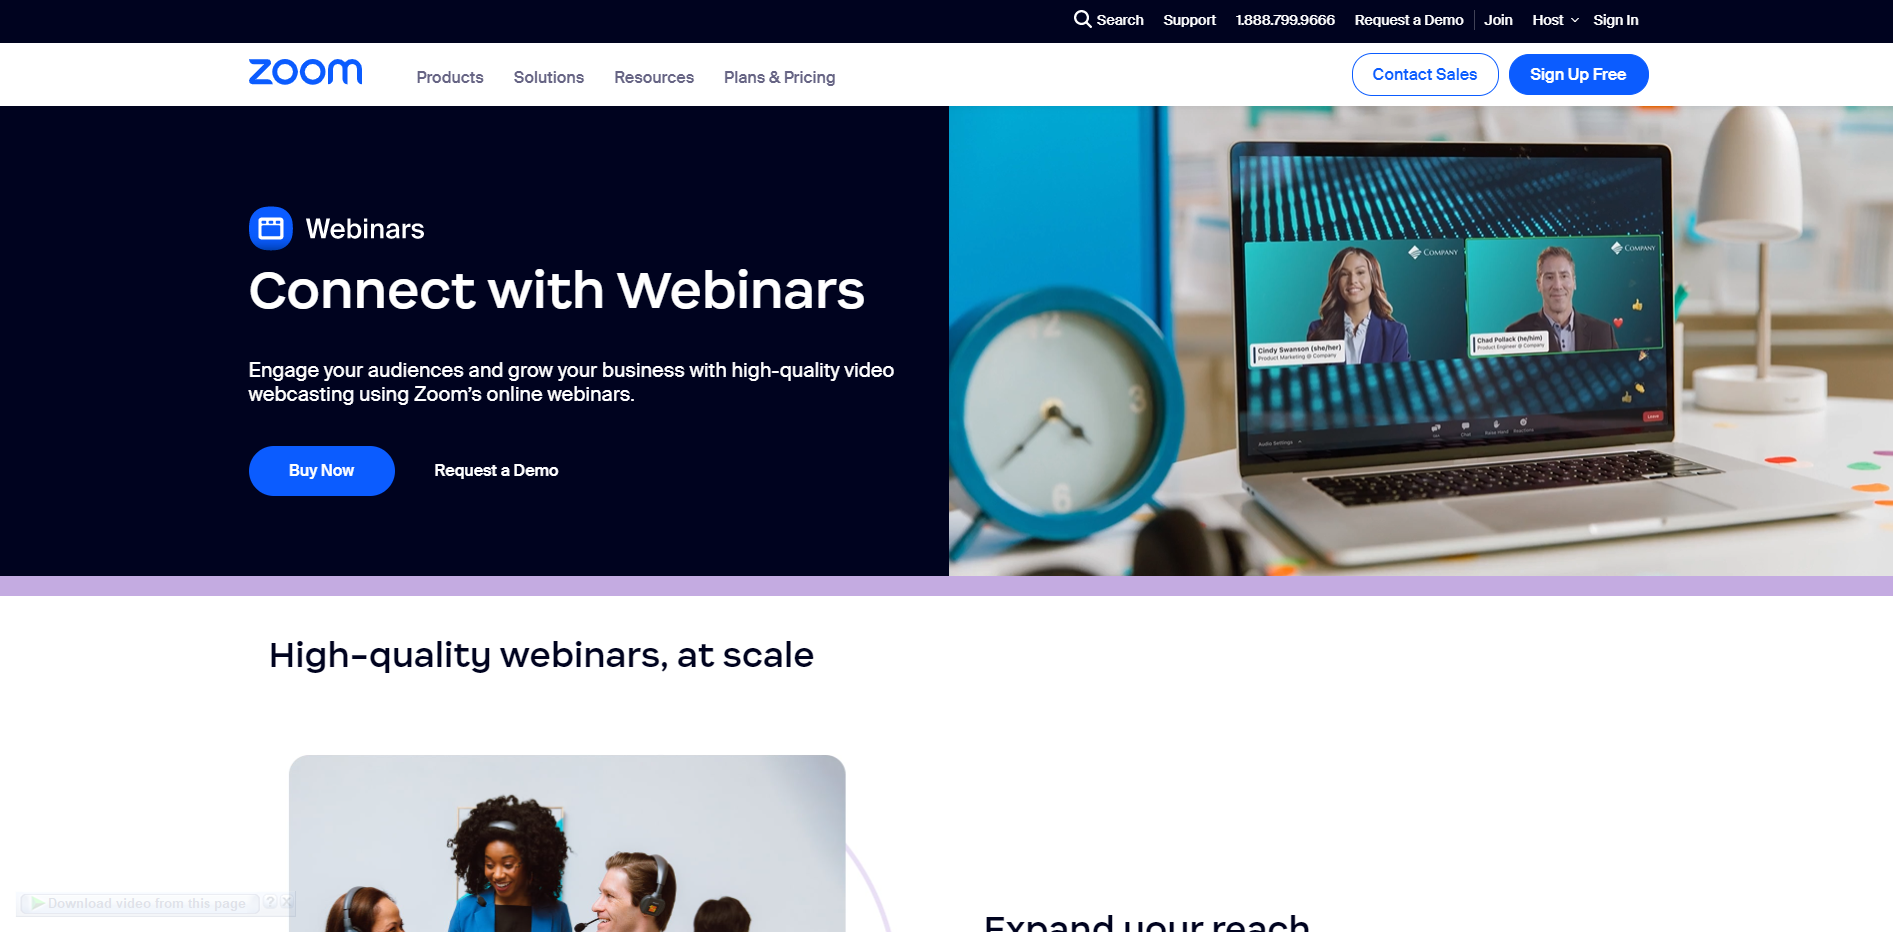 Zoom Events and Webinars